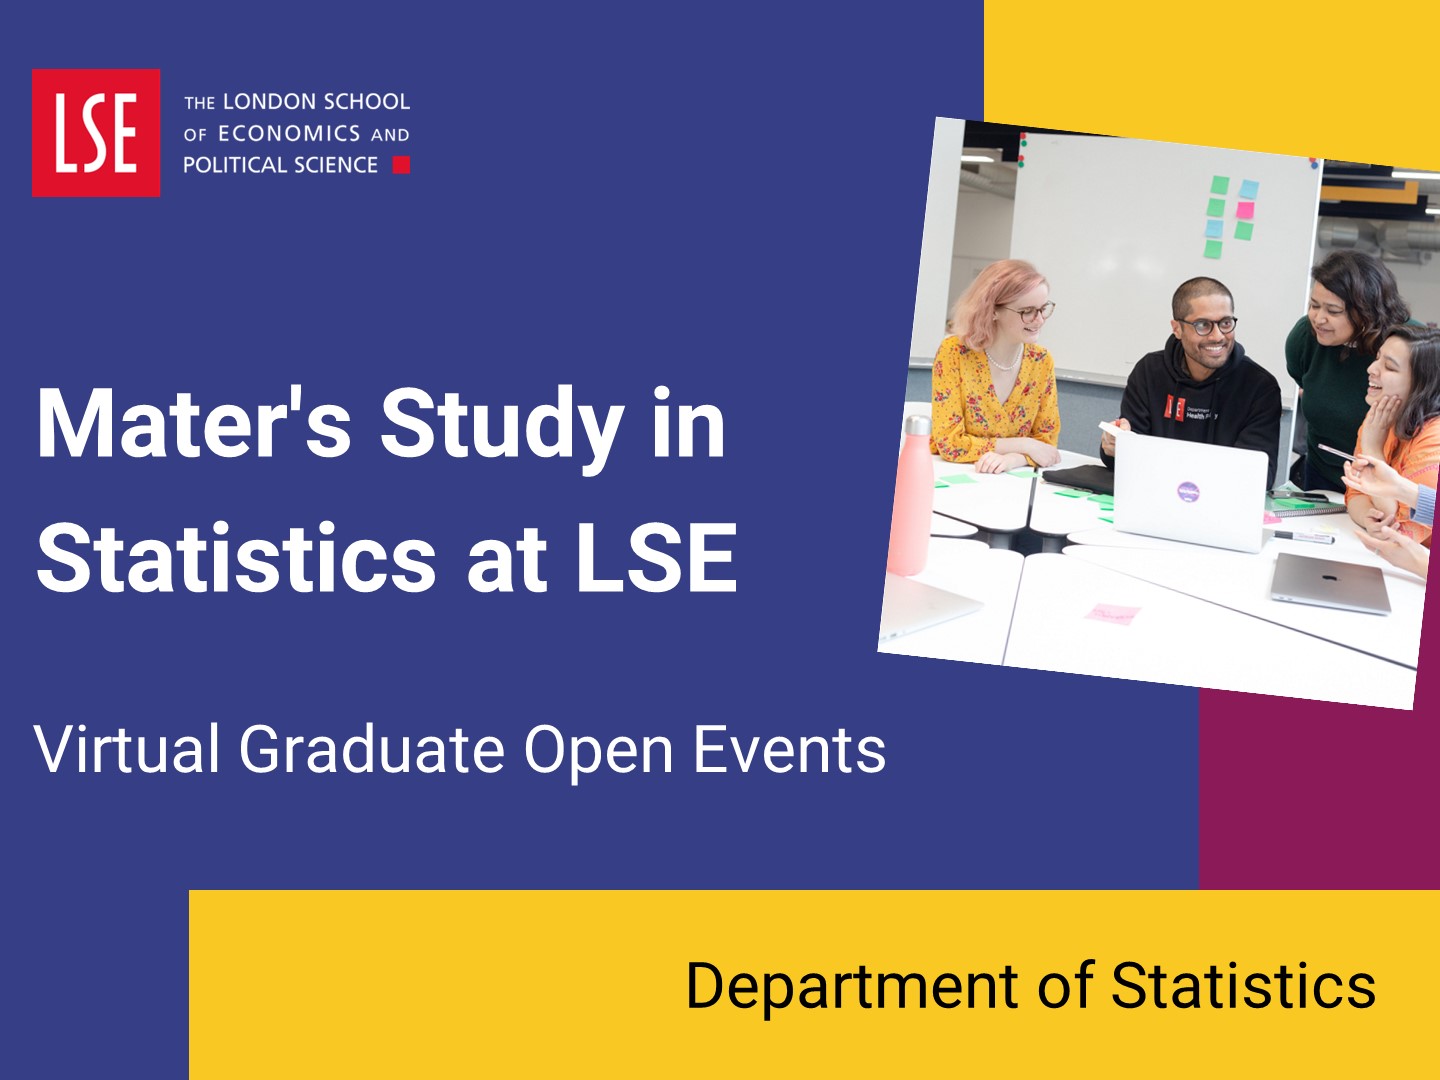 An introduction to master's study in Statistics at LSE